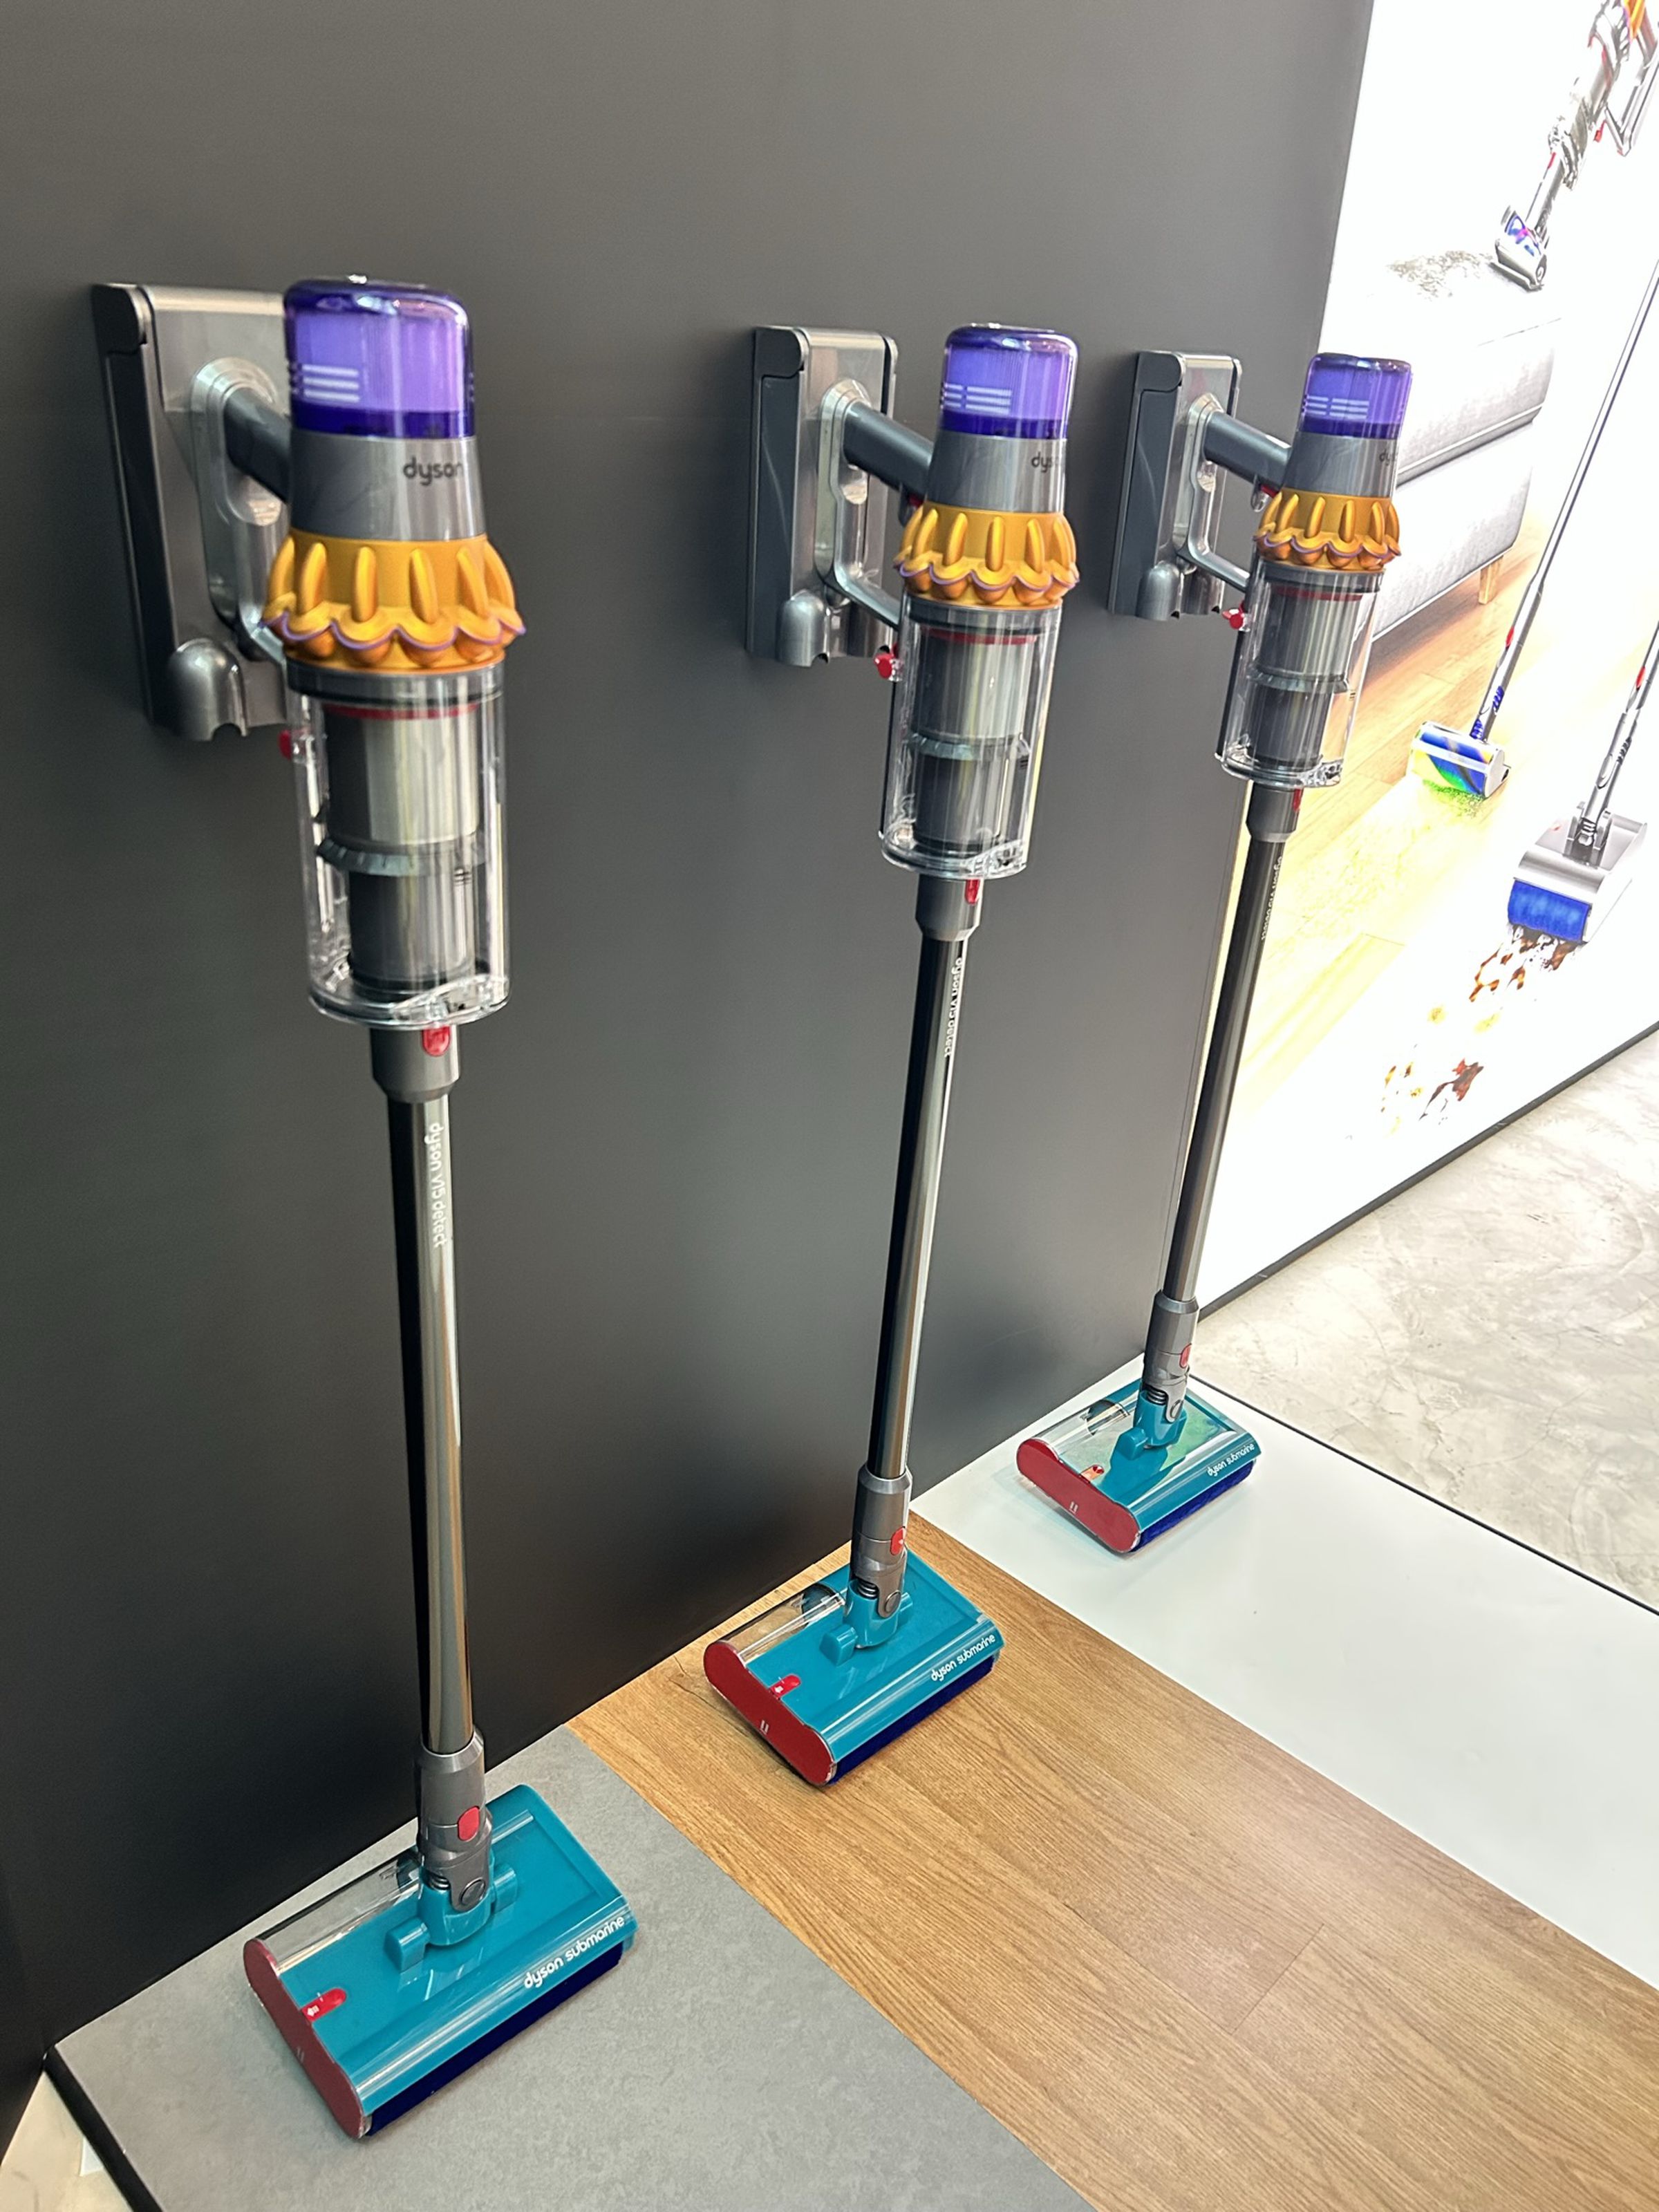 Three identical stick vacs mounted to a wall. They are mostly a drab gray, but the new Submarine heads are brightly colored turquoise and red.